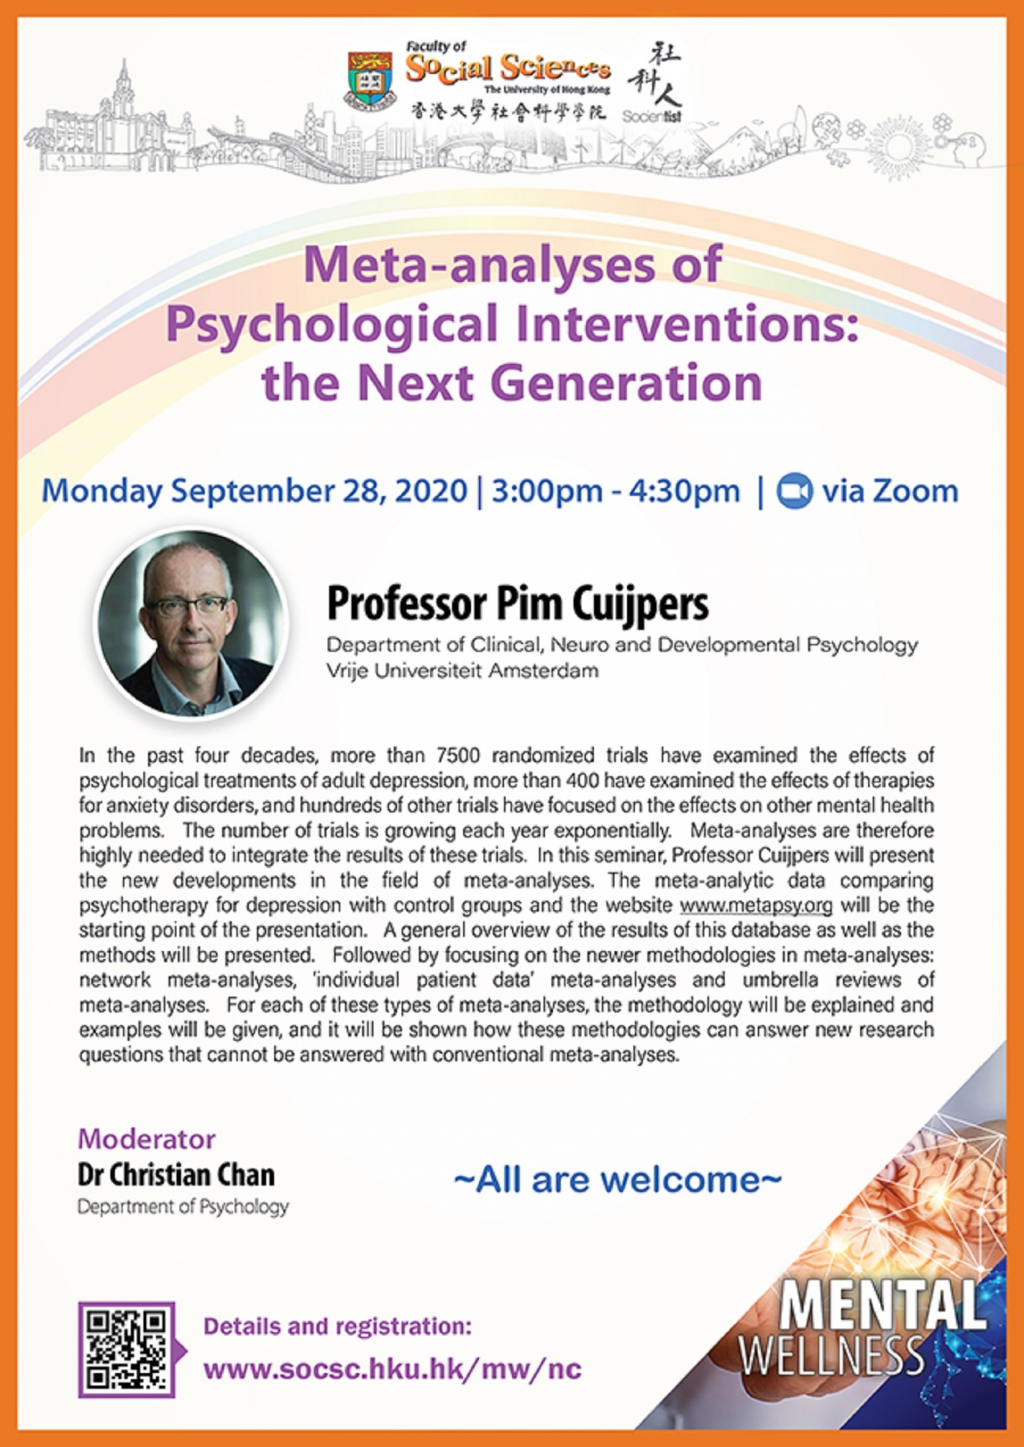 Mental Wellness Seminar on Meta-analyses of Psychological Interventions: the Next Generation (September 28, 3:00pm)